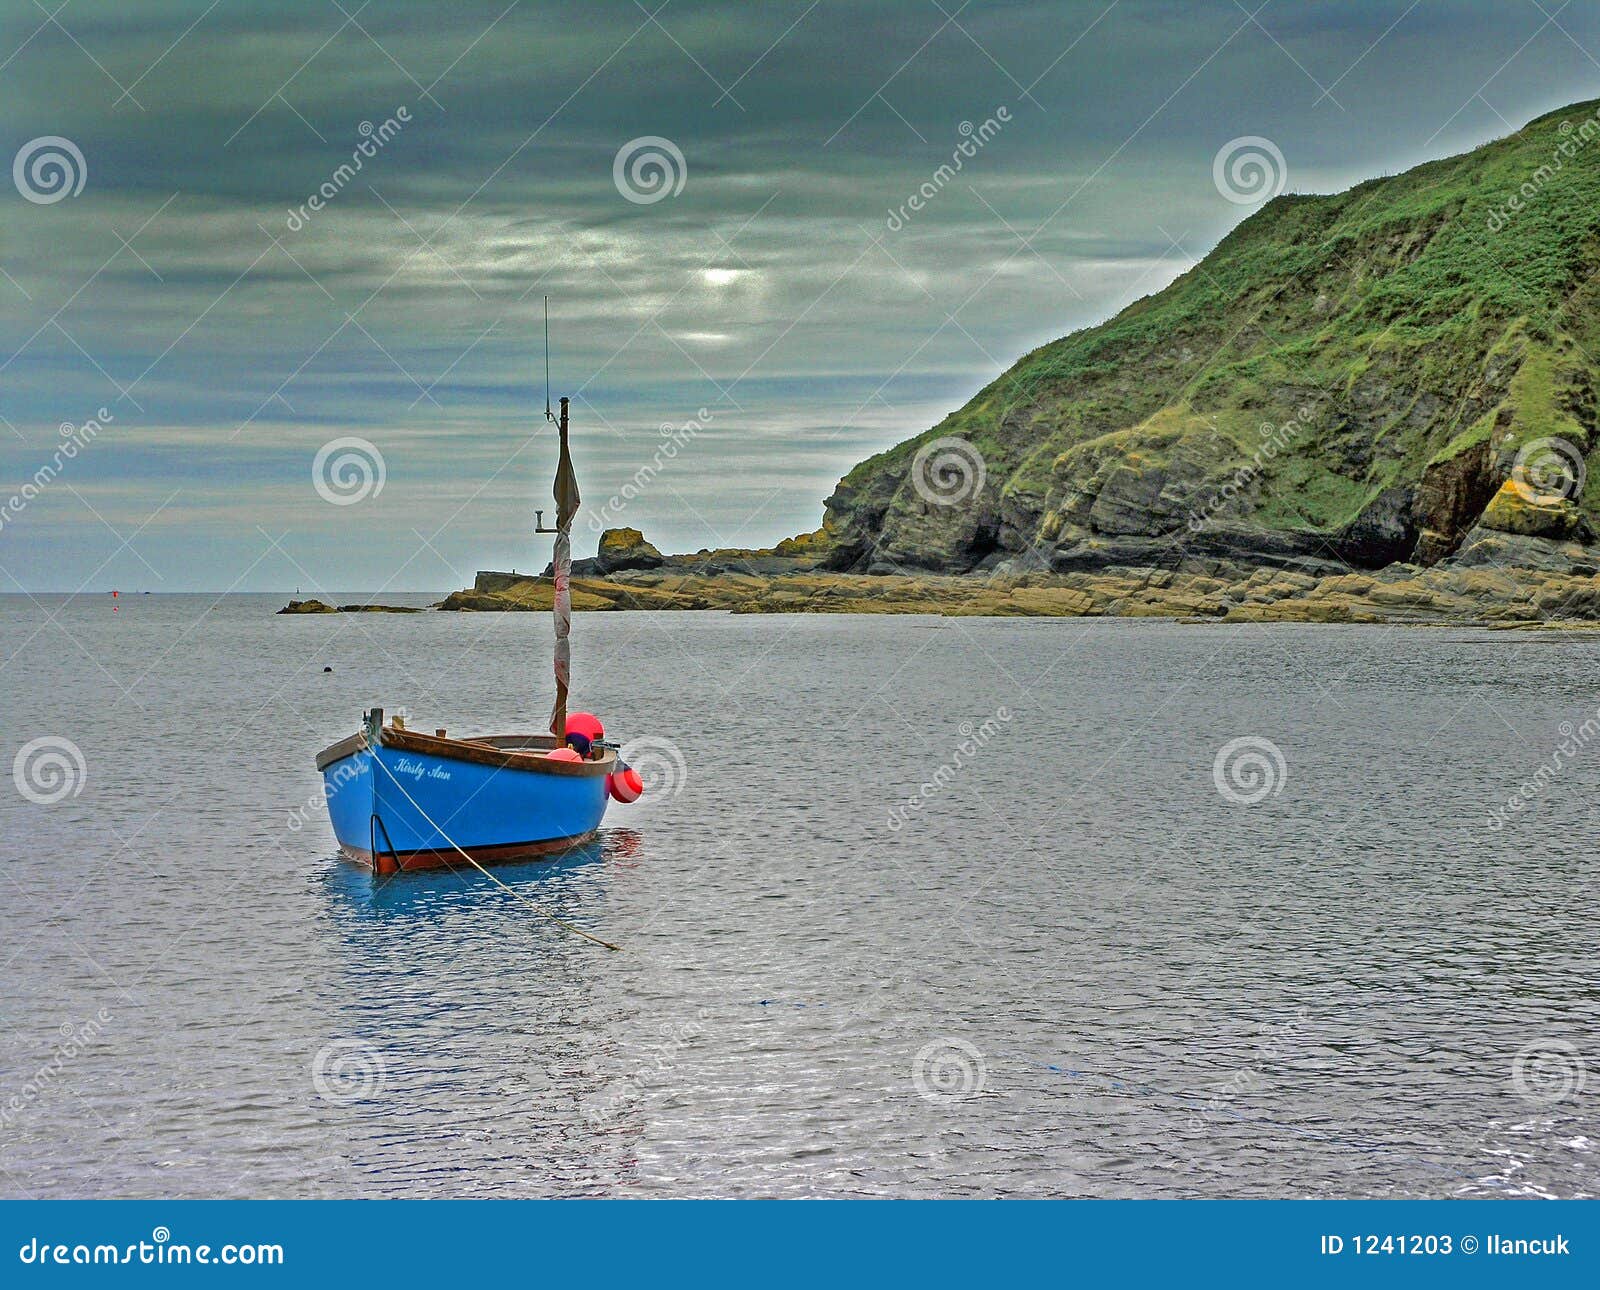 Cornish Fishing Boat stock image. Image of cove, clouds ...